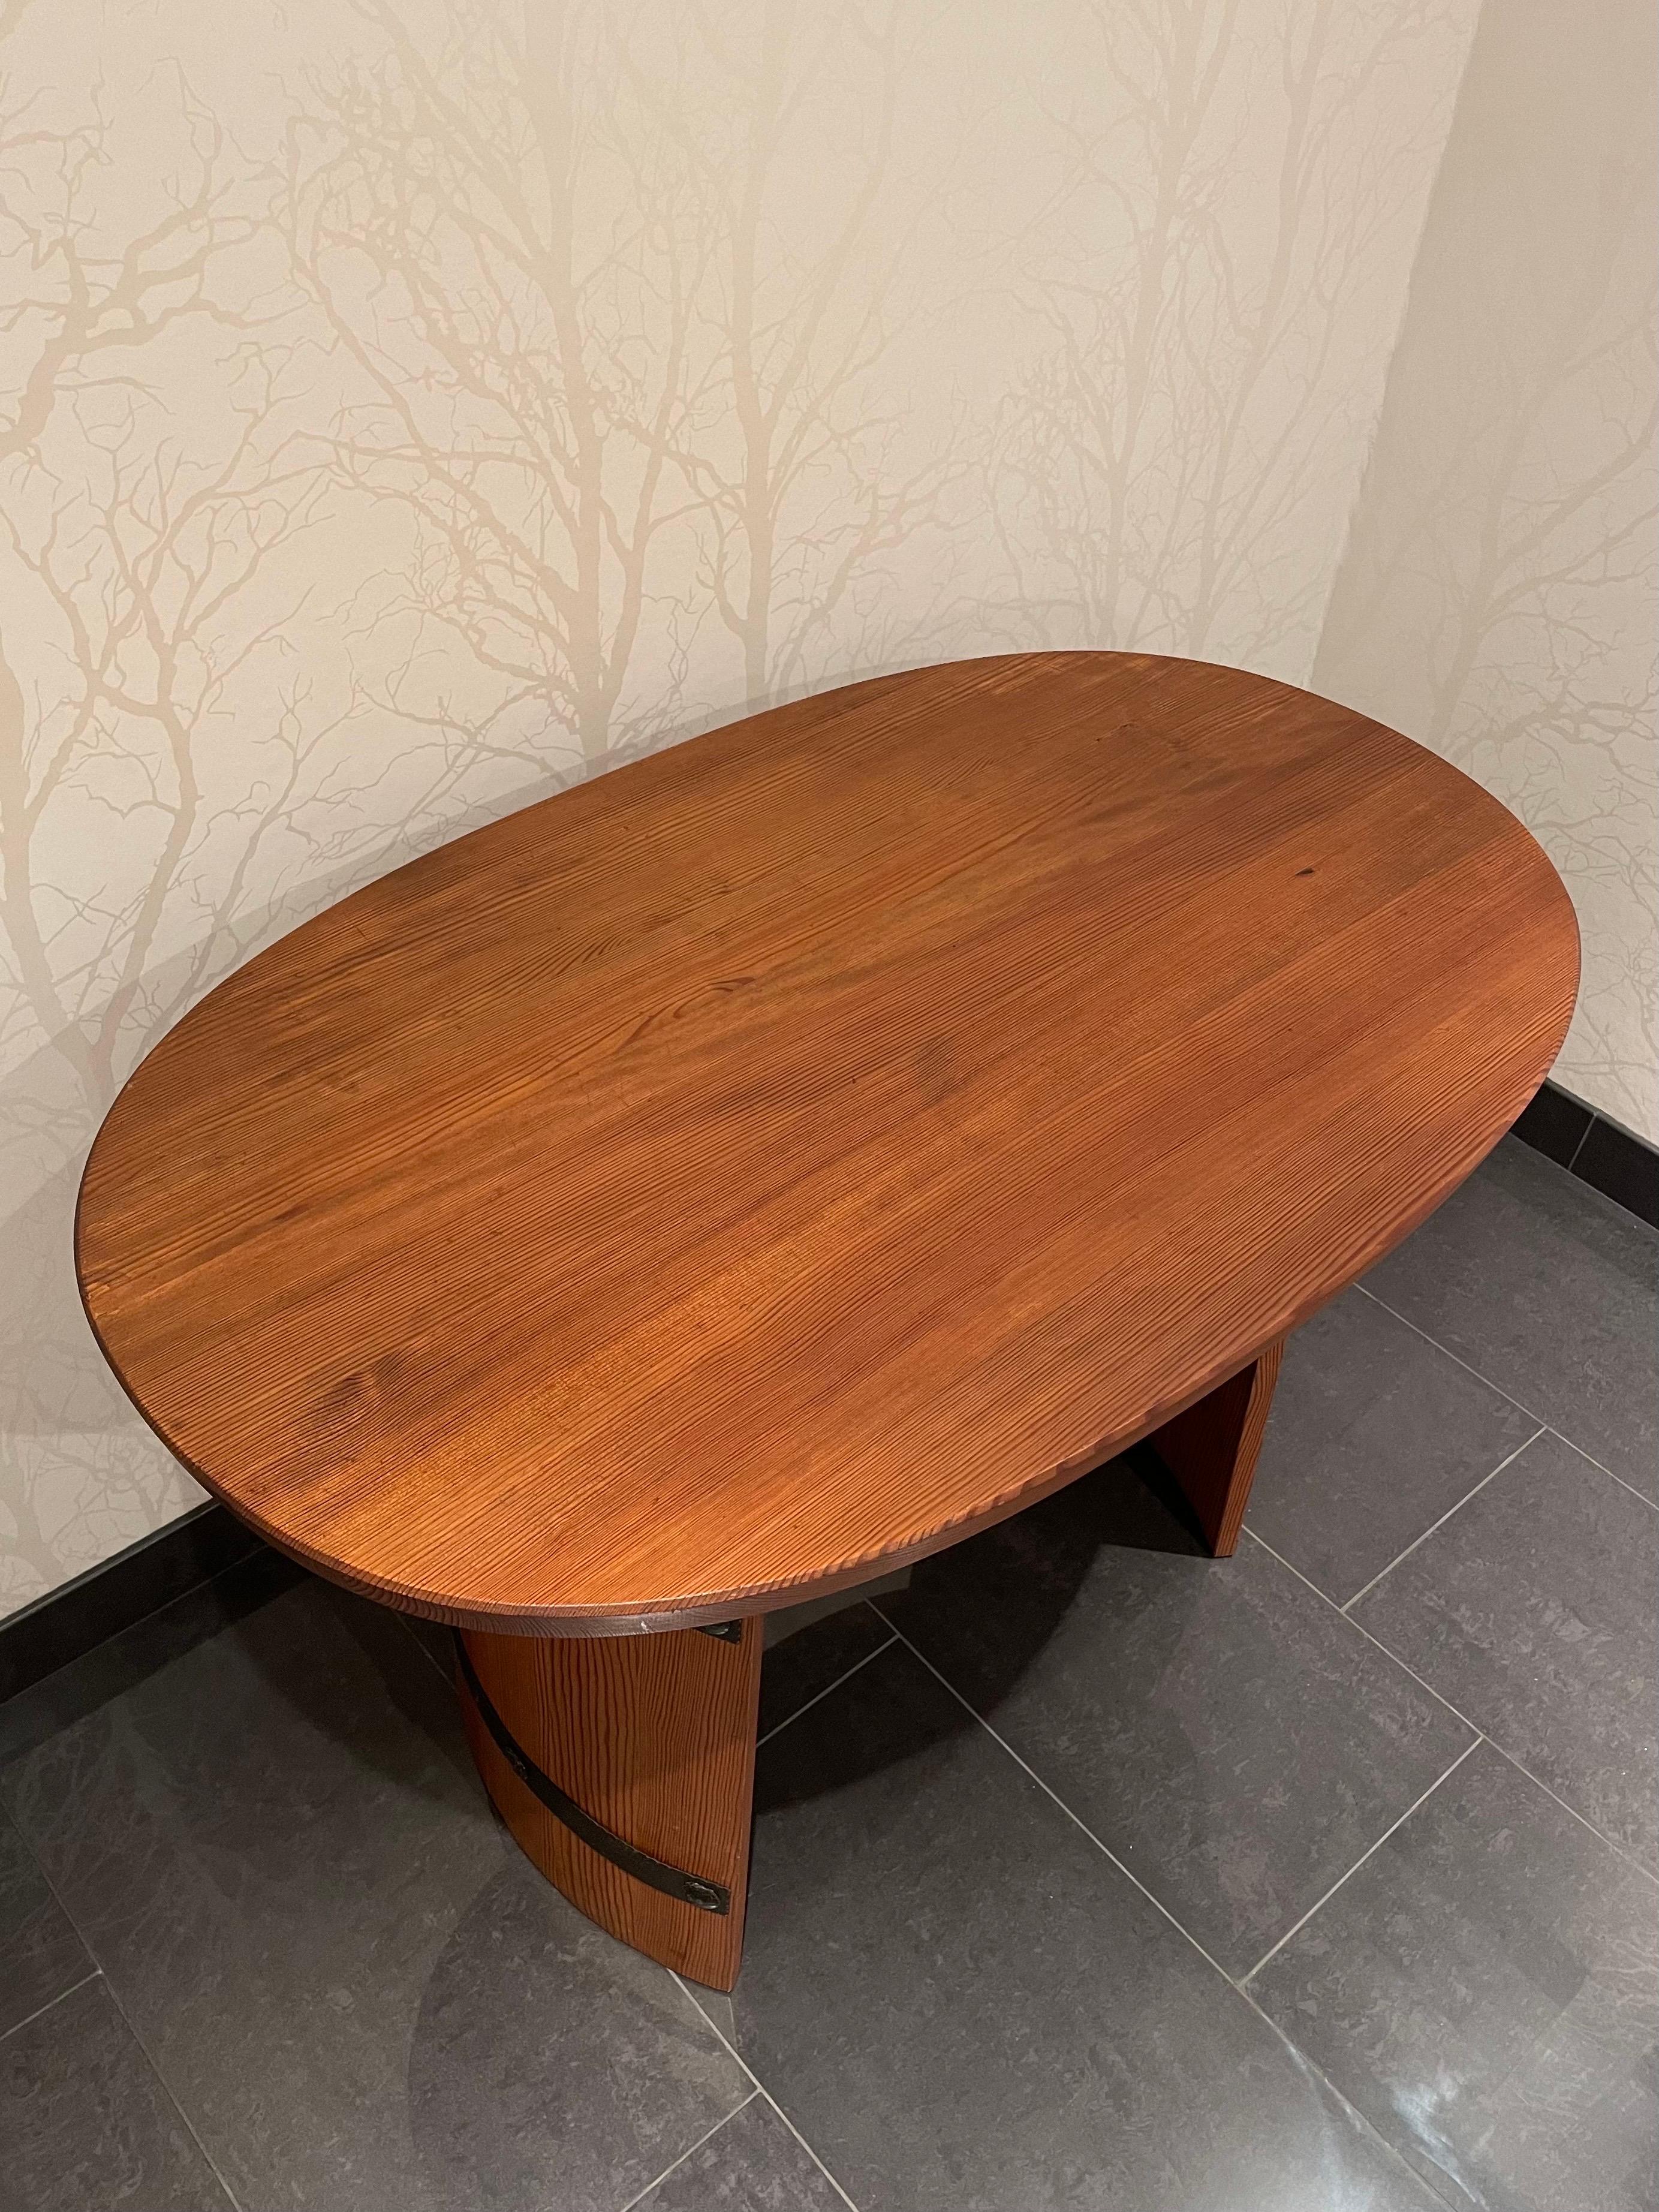 This is the Swedish solid stained pine coffee table manufactured by Åby Möbelfabrik in the 1930/40s

It comes with a 3.5 centimeter thick, oval shaped table top with an underlying shelf. 
The two curved barrel shaped legs are stabilized with two